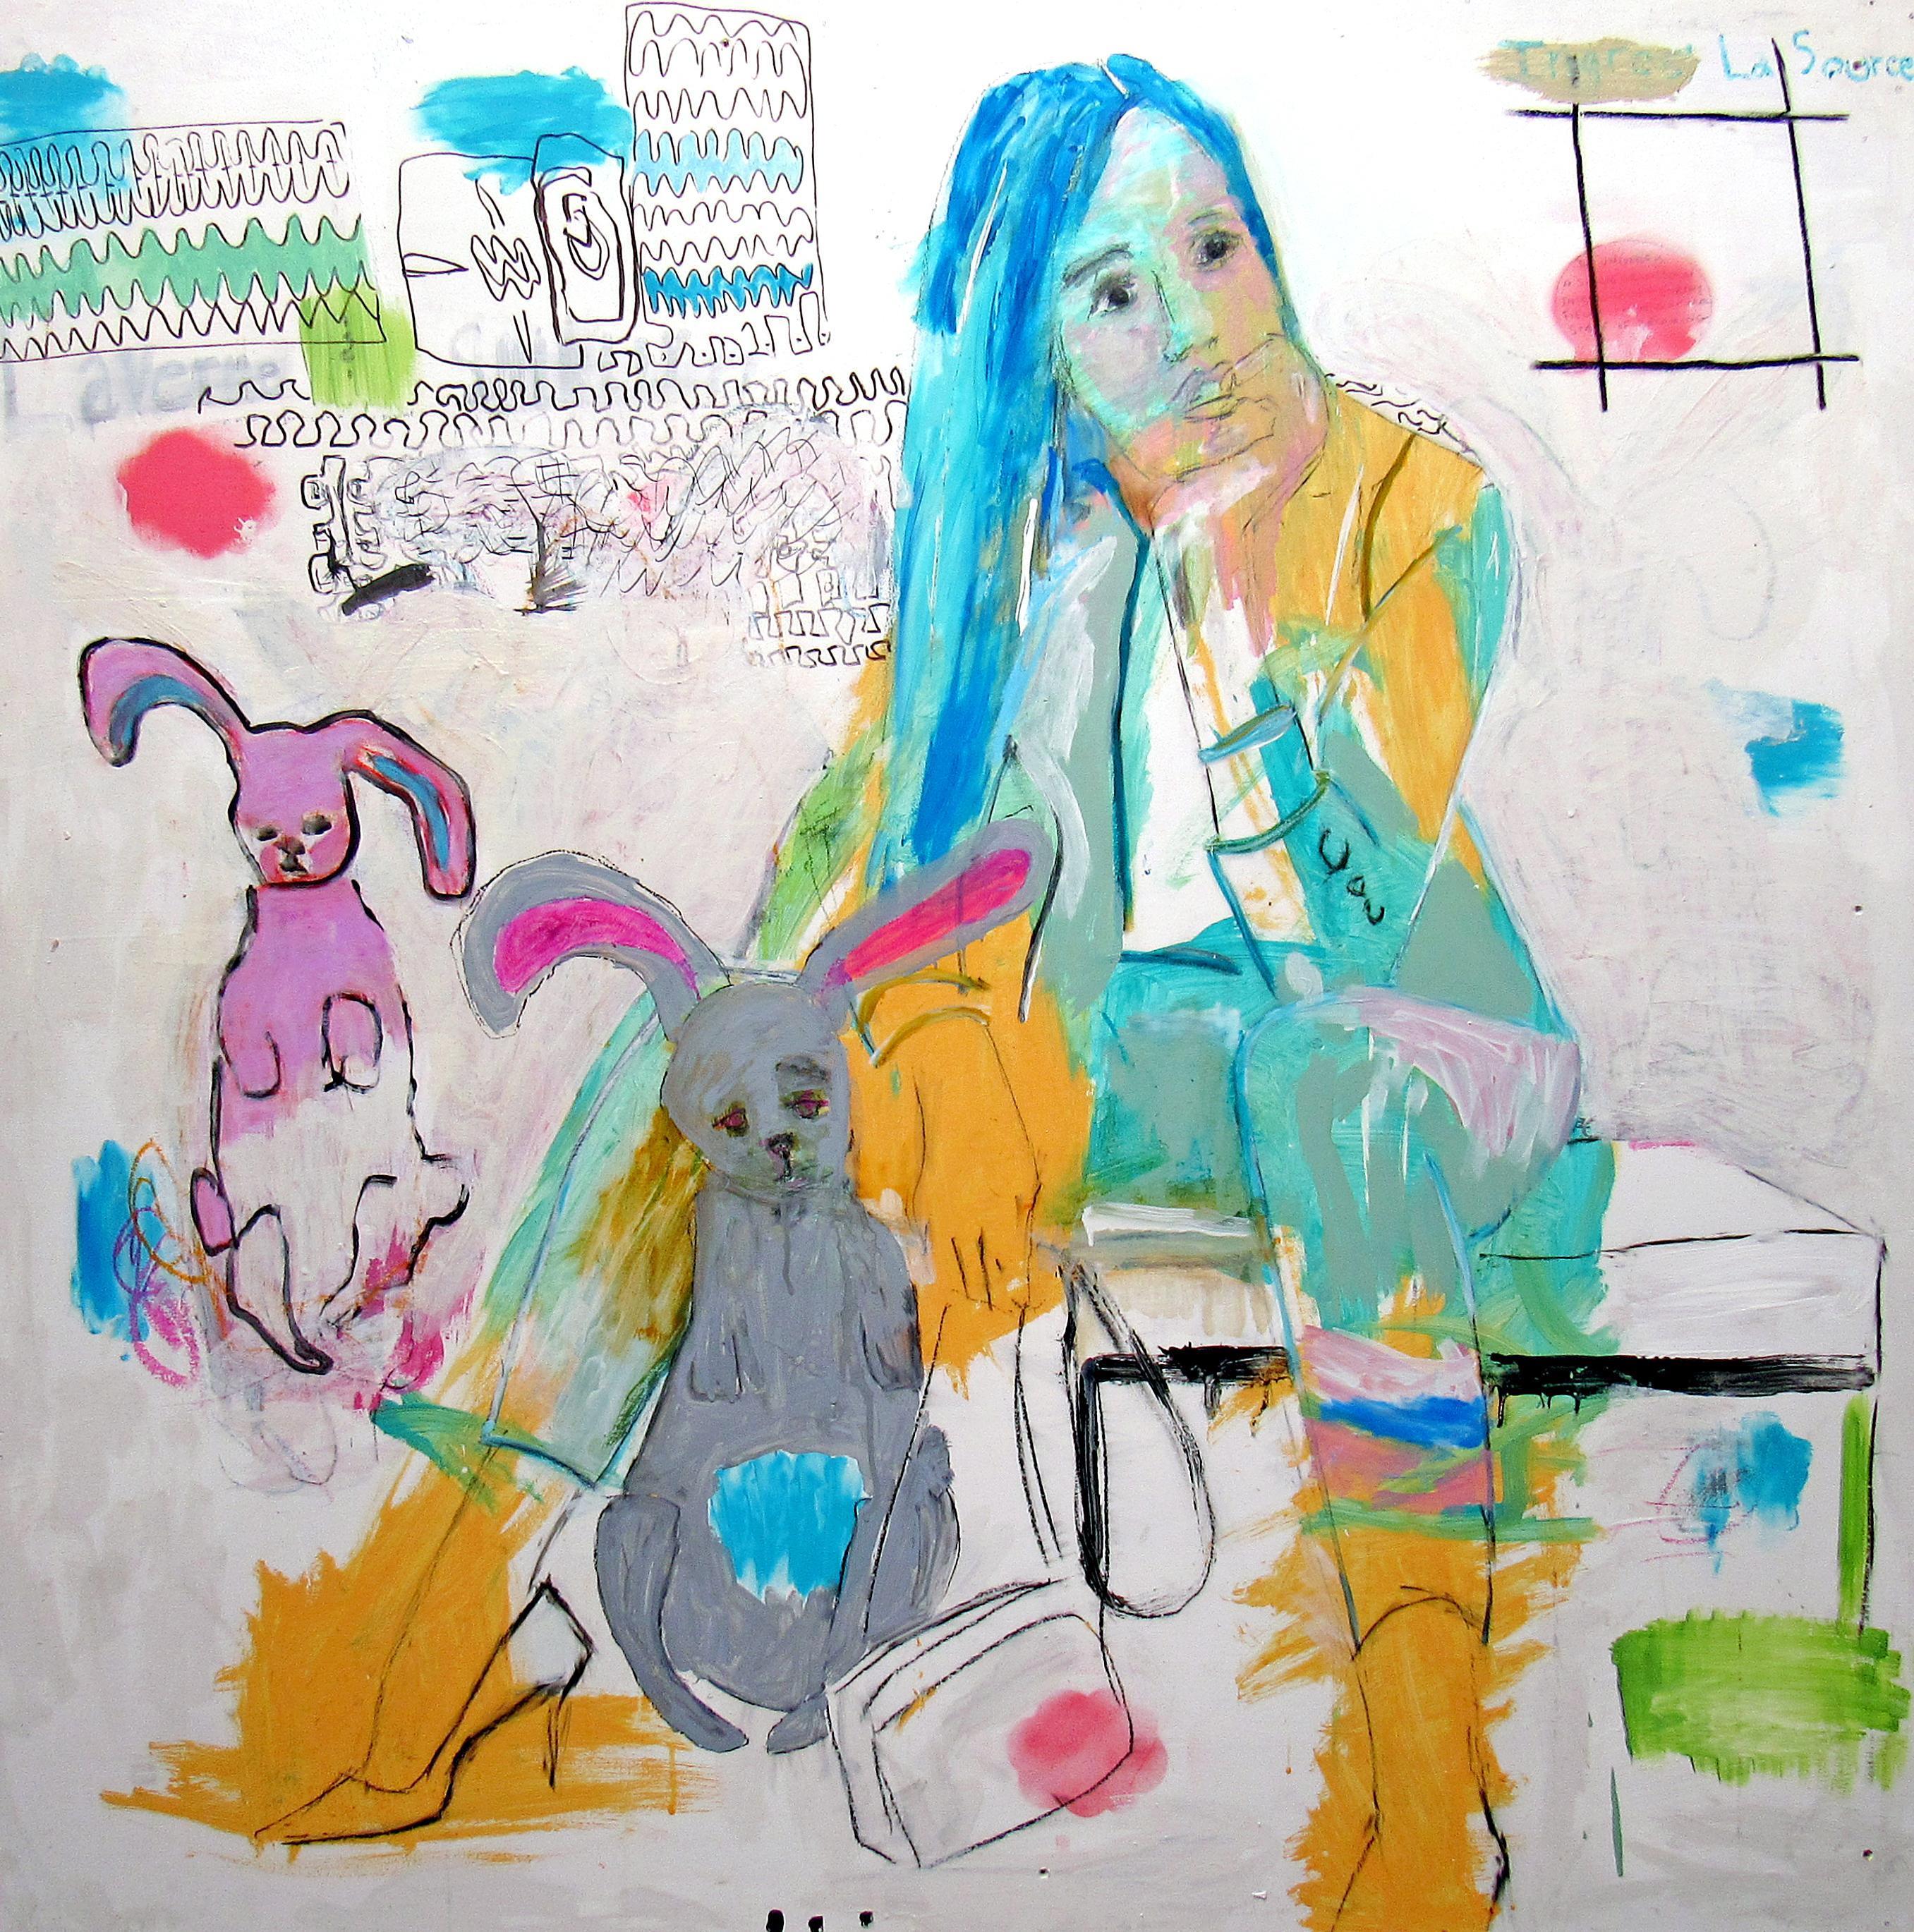 The Source, colorful, figurative woman and bunny forms blue on neutral ground